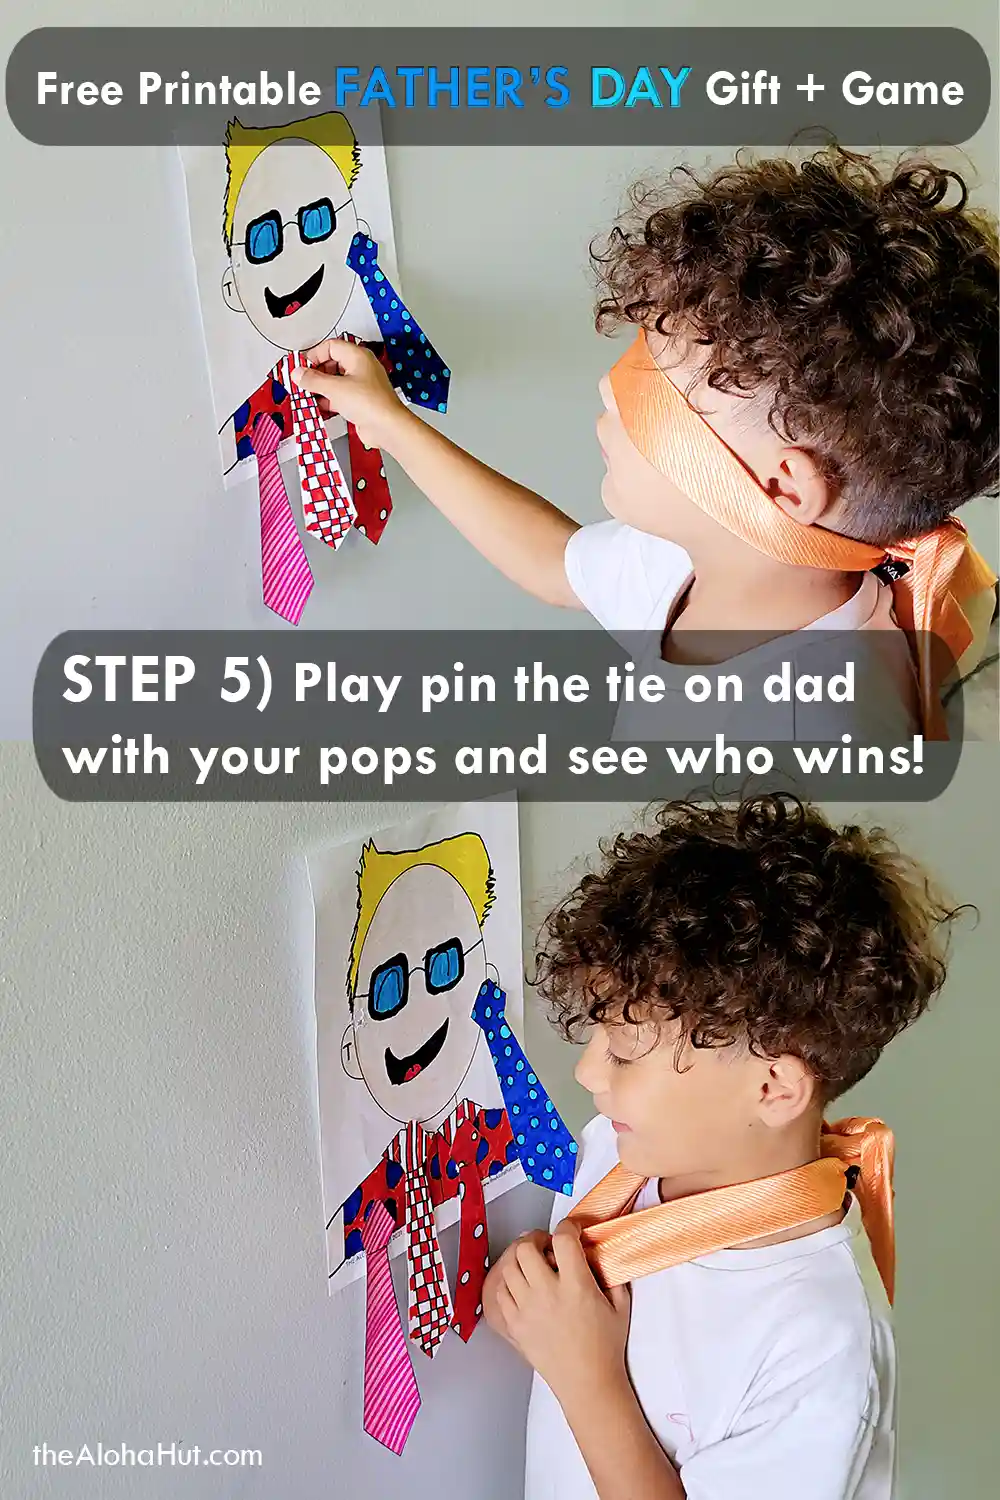 Pin the tie on dad Father's Day game and activity. Perfect activity for primary singing time at church or for the kids to play with dad. Print the Father's Day coloring pages and help kids draw a picture of dad or grandpa. Then print the ties and have the kids write messages on the ties. Makes a great Father's Day card and easy Father's Day gift from the kids. Also a great art activity for the kids to draw pictures of dad.